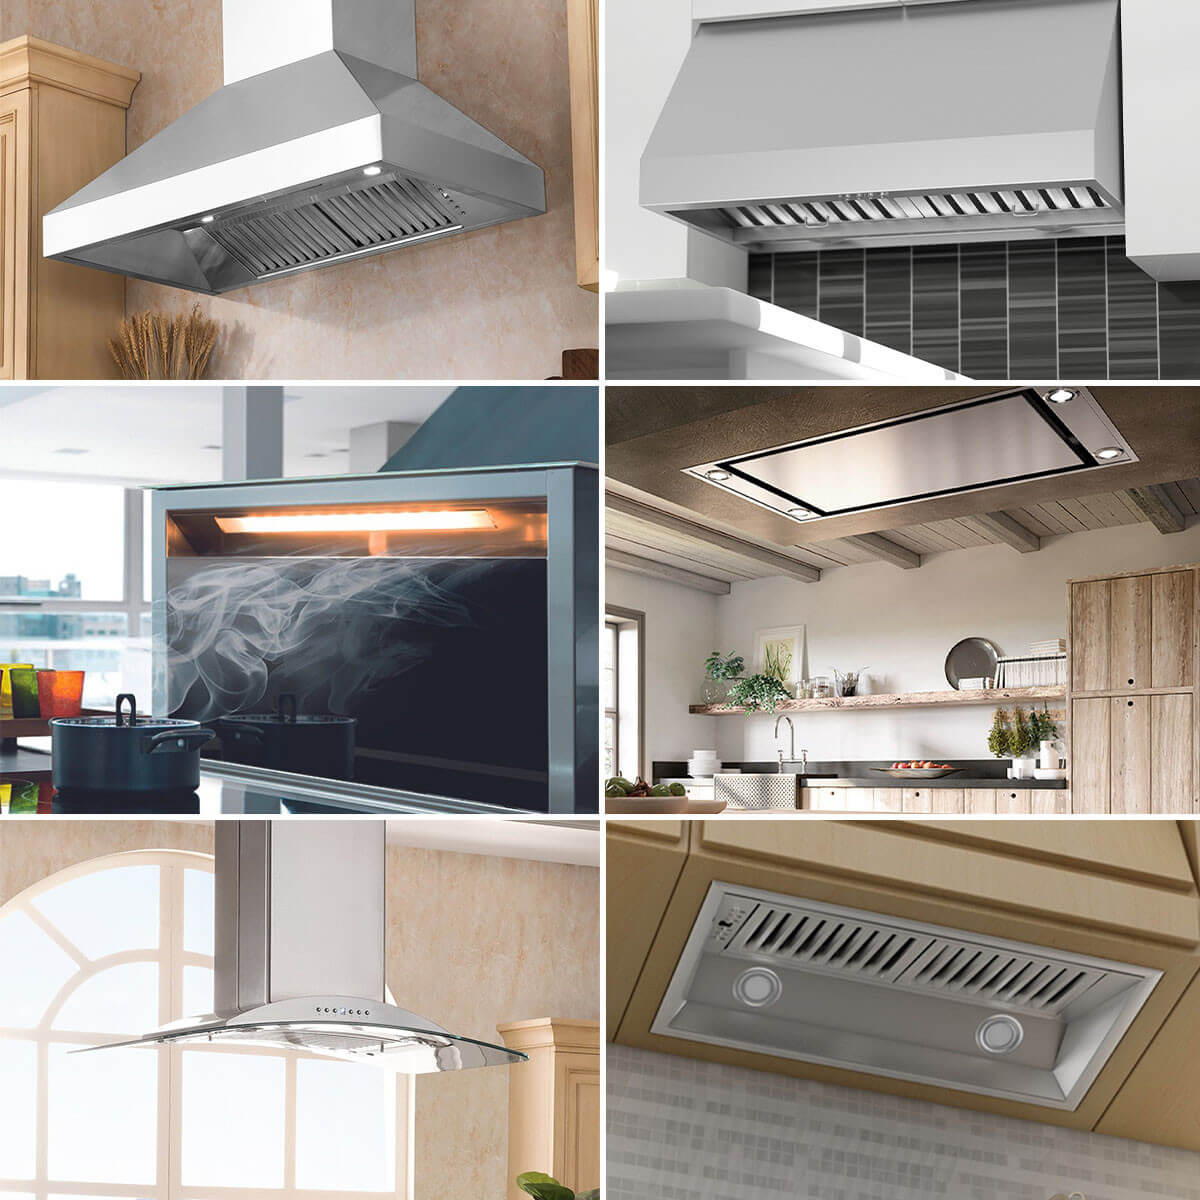 Wood Range Hoods - Under Cabinet Mount, Wall Mount and Inserts